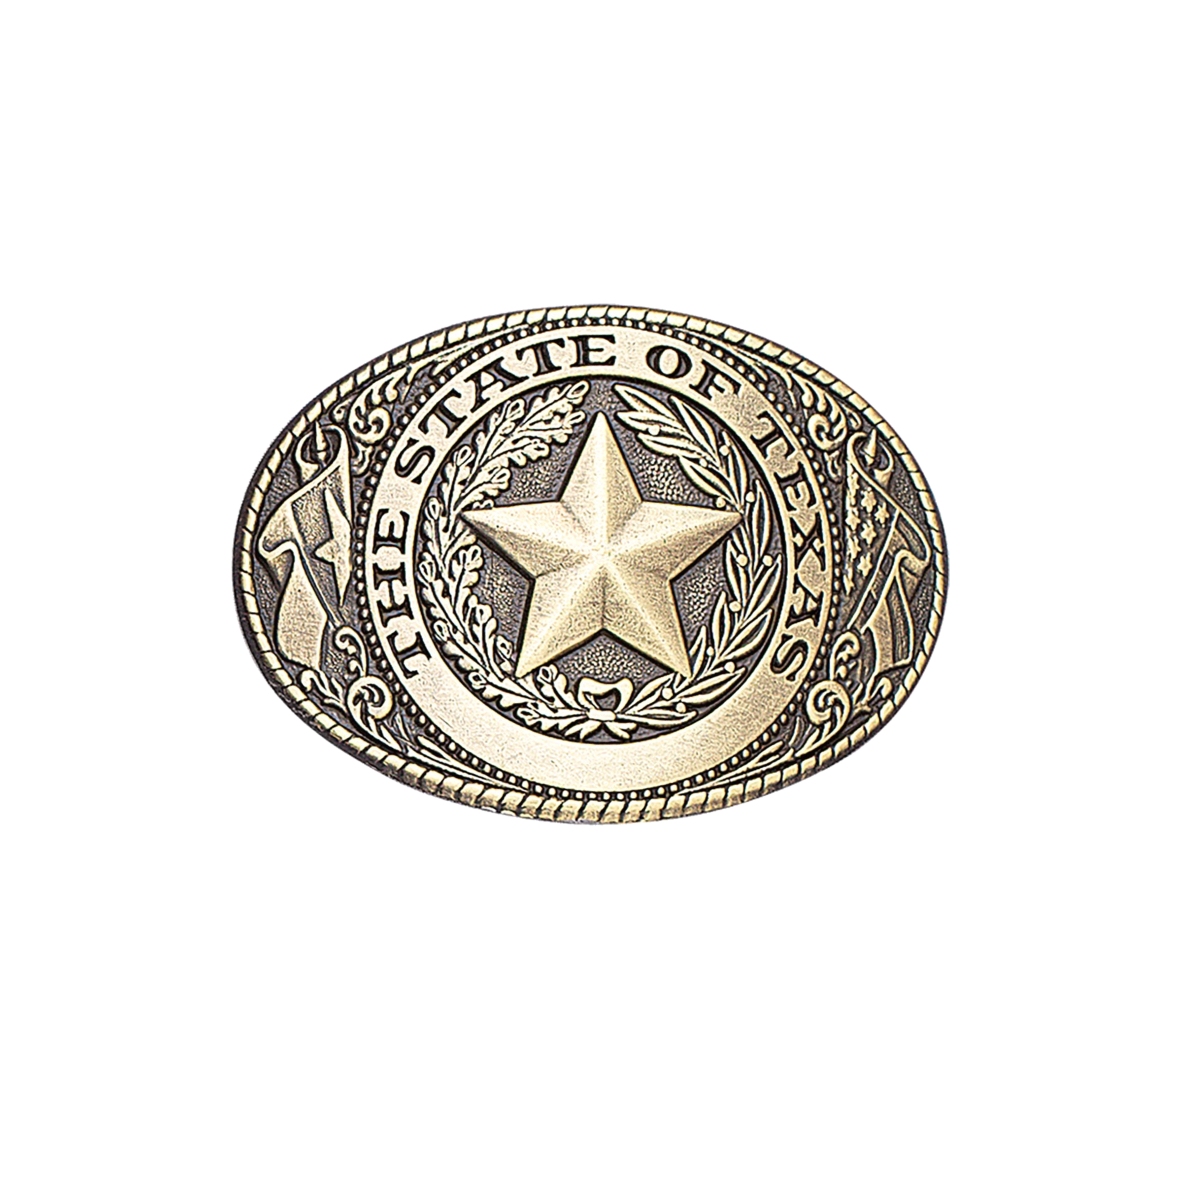 MF-37002 Belt Buckle The State of Texas Brass